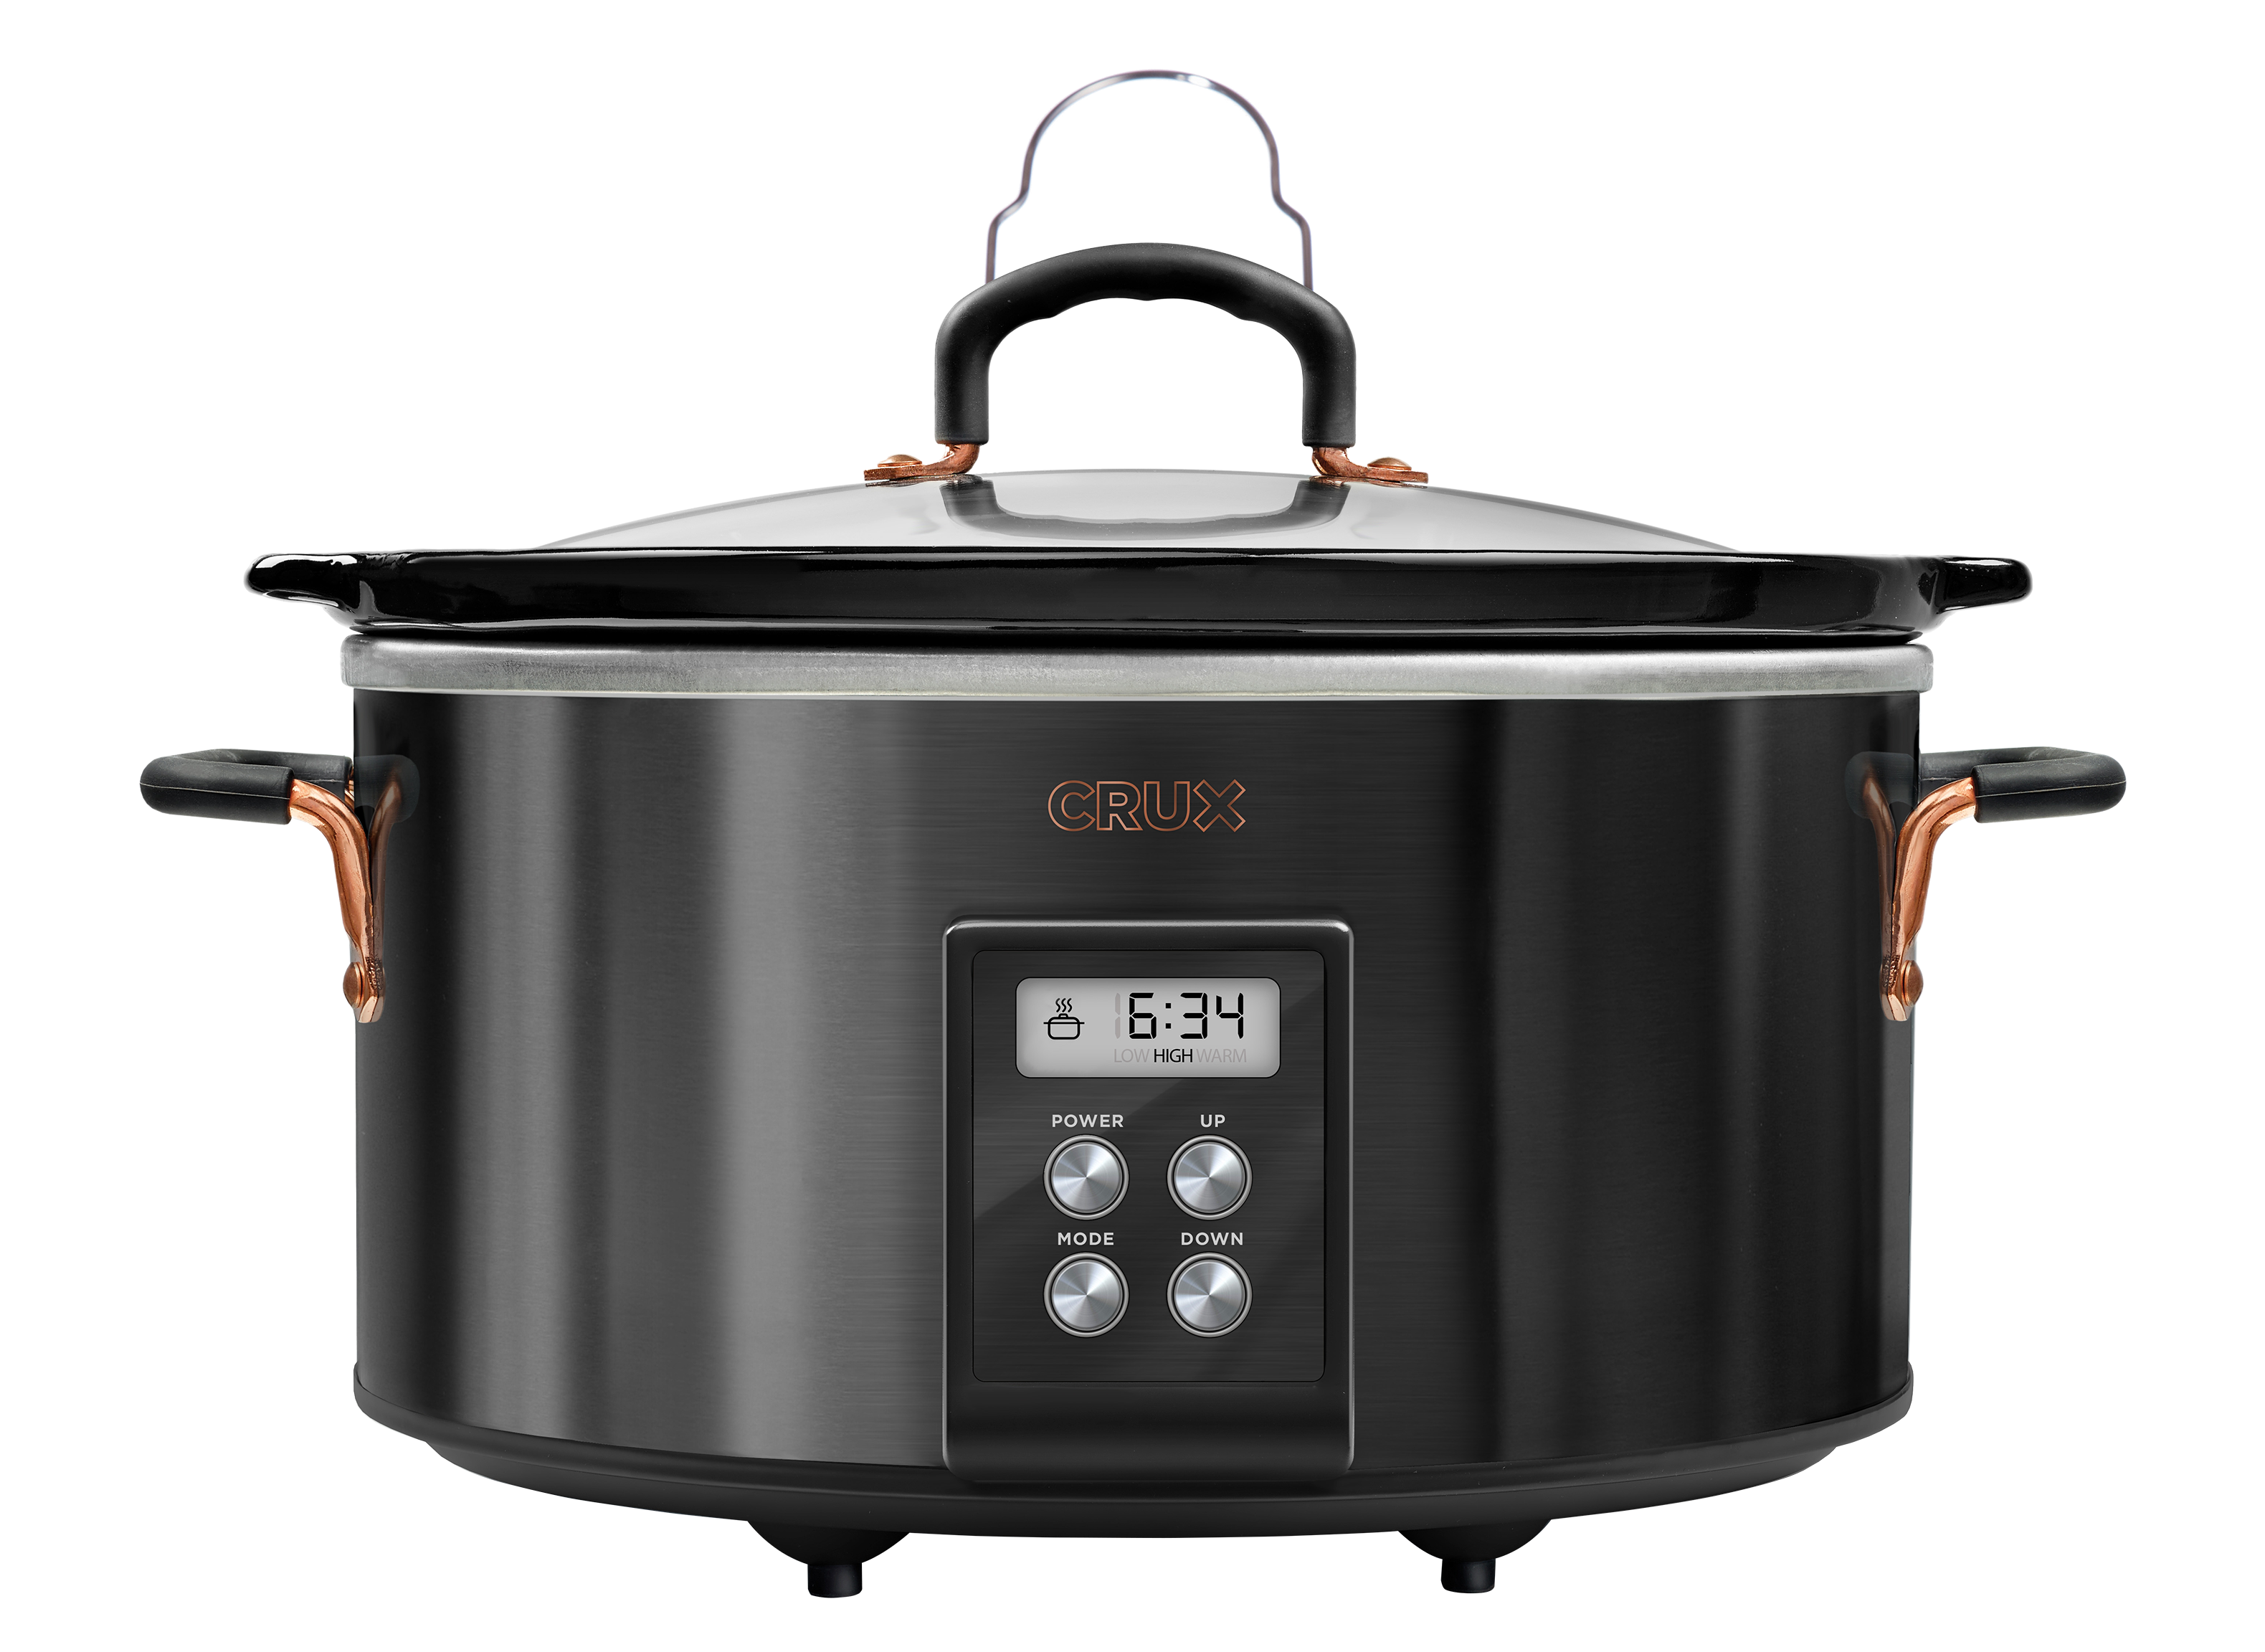 https://crdms.images.consumerreports.org/prod/products/cr/models/397831-slow-cookers-crux-6-qt-programmable-14681-10003261.png